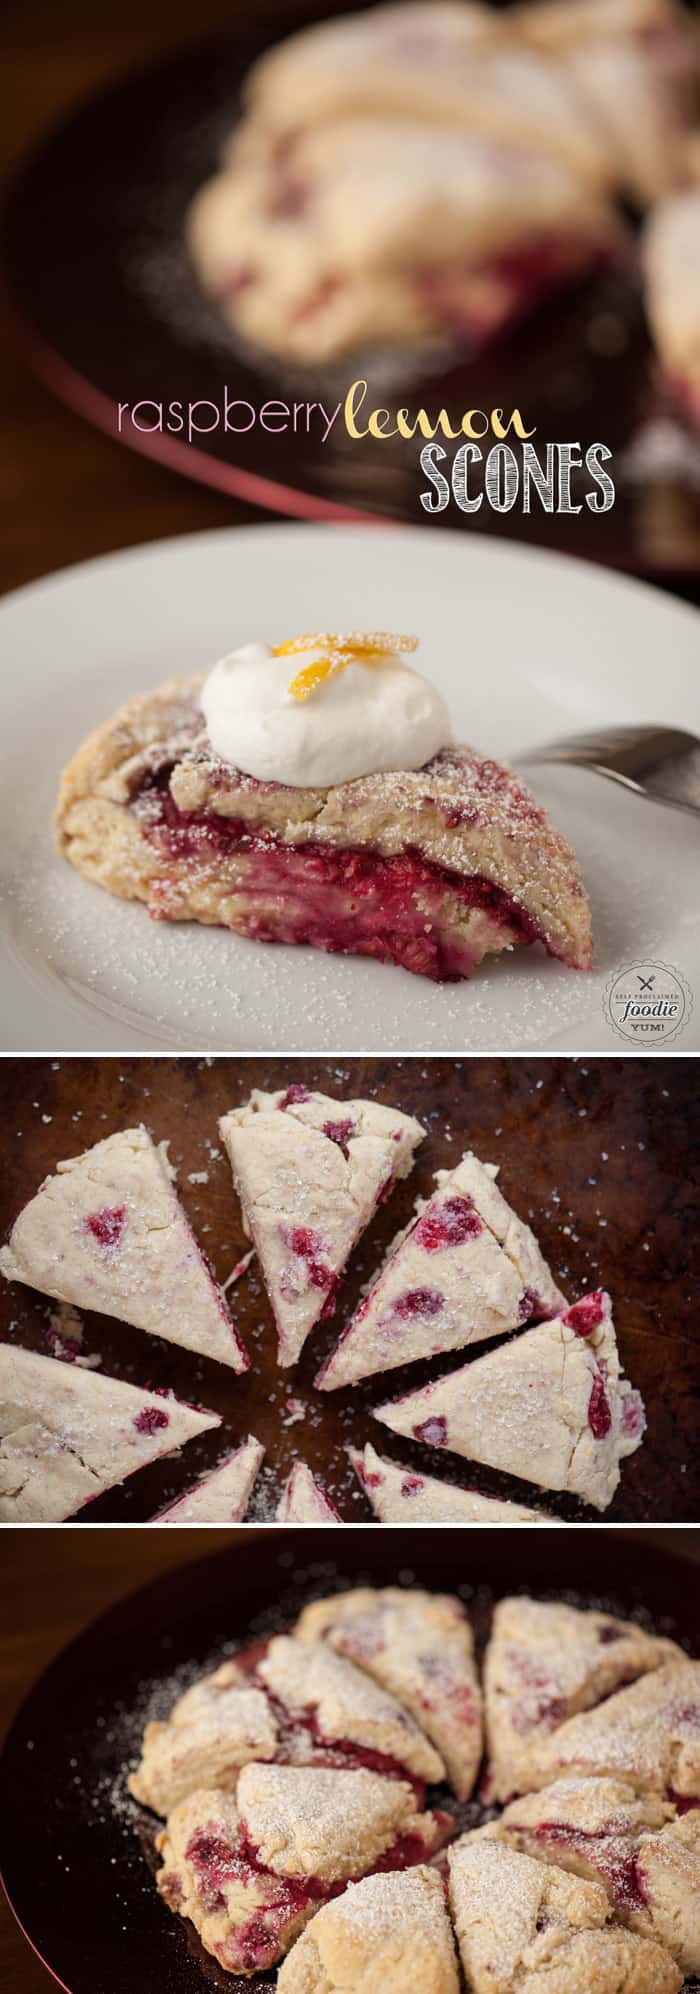 Homemade buttermilk Raspberry Lemon Scones are a delightful summer treat that you can enjoy for breakfast, brunch, or afternoon tea.